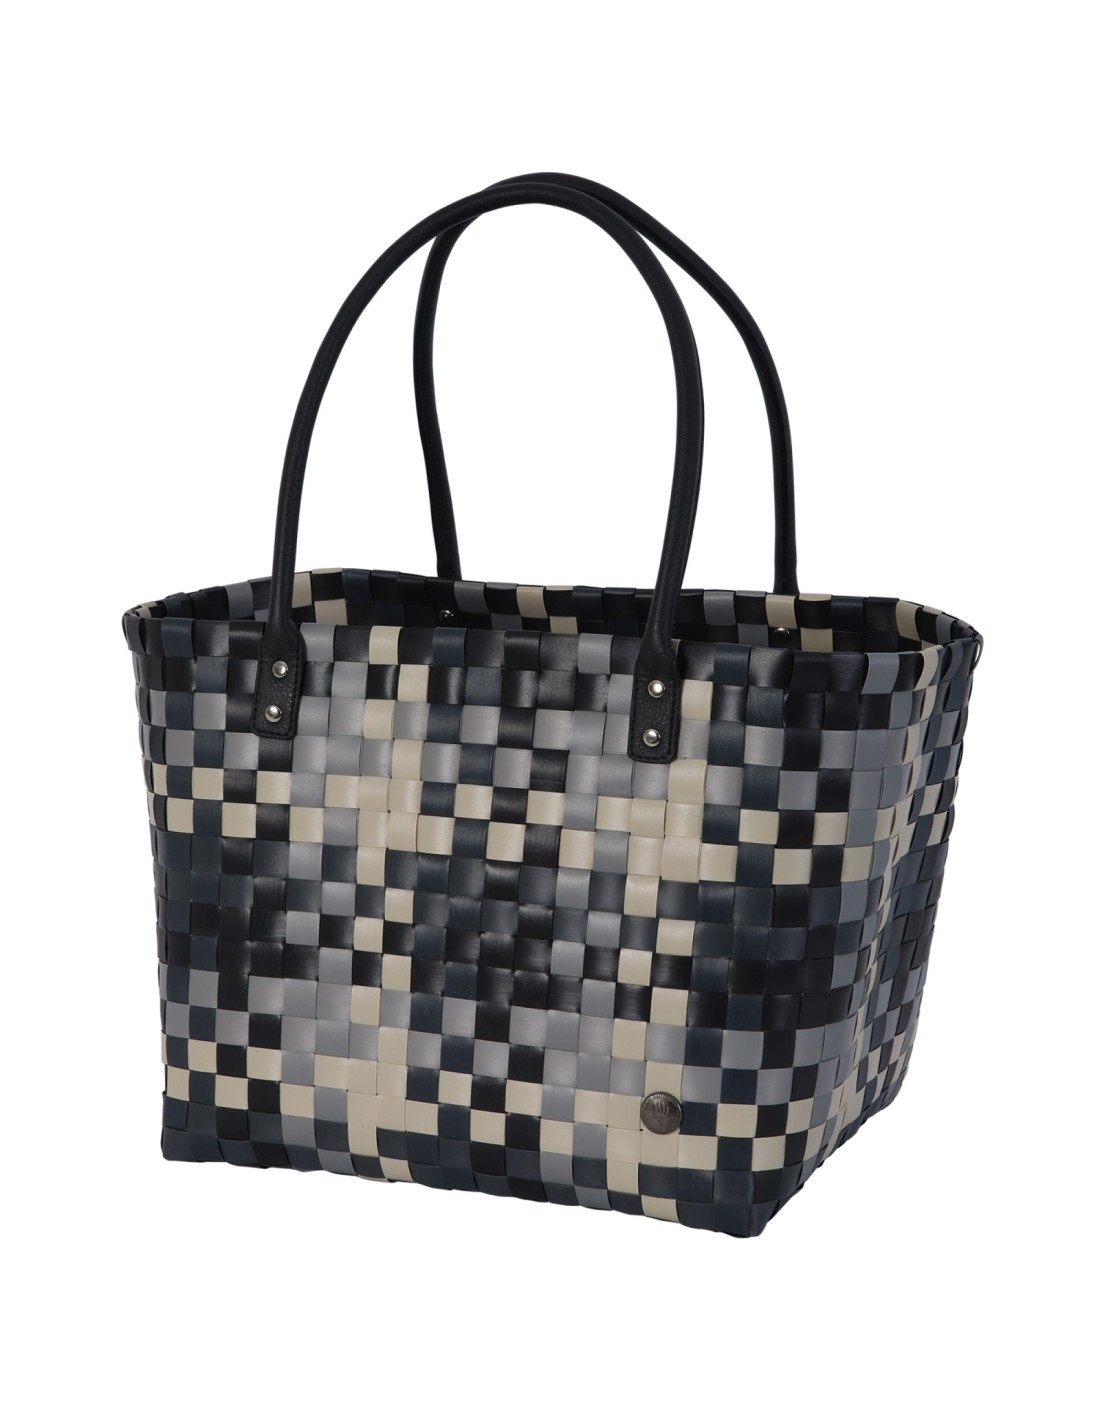 Shopper Mingle - Size S with PU handles - Handed By 